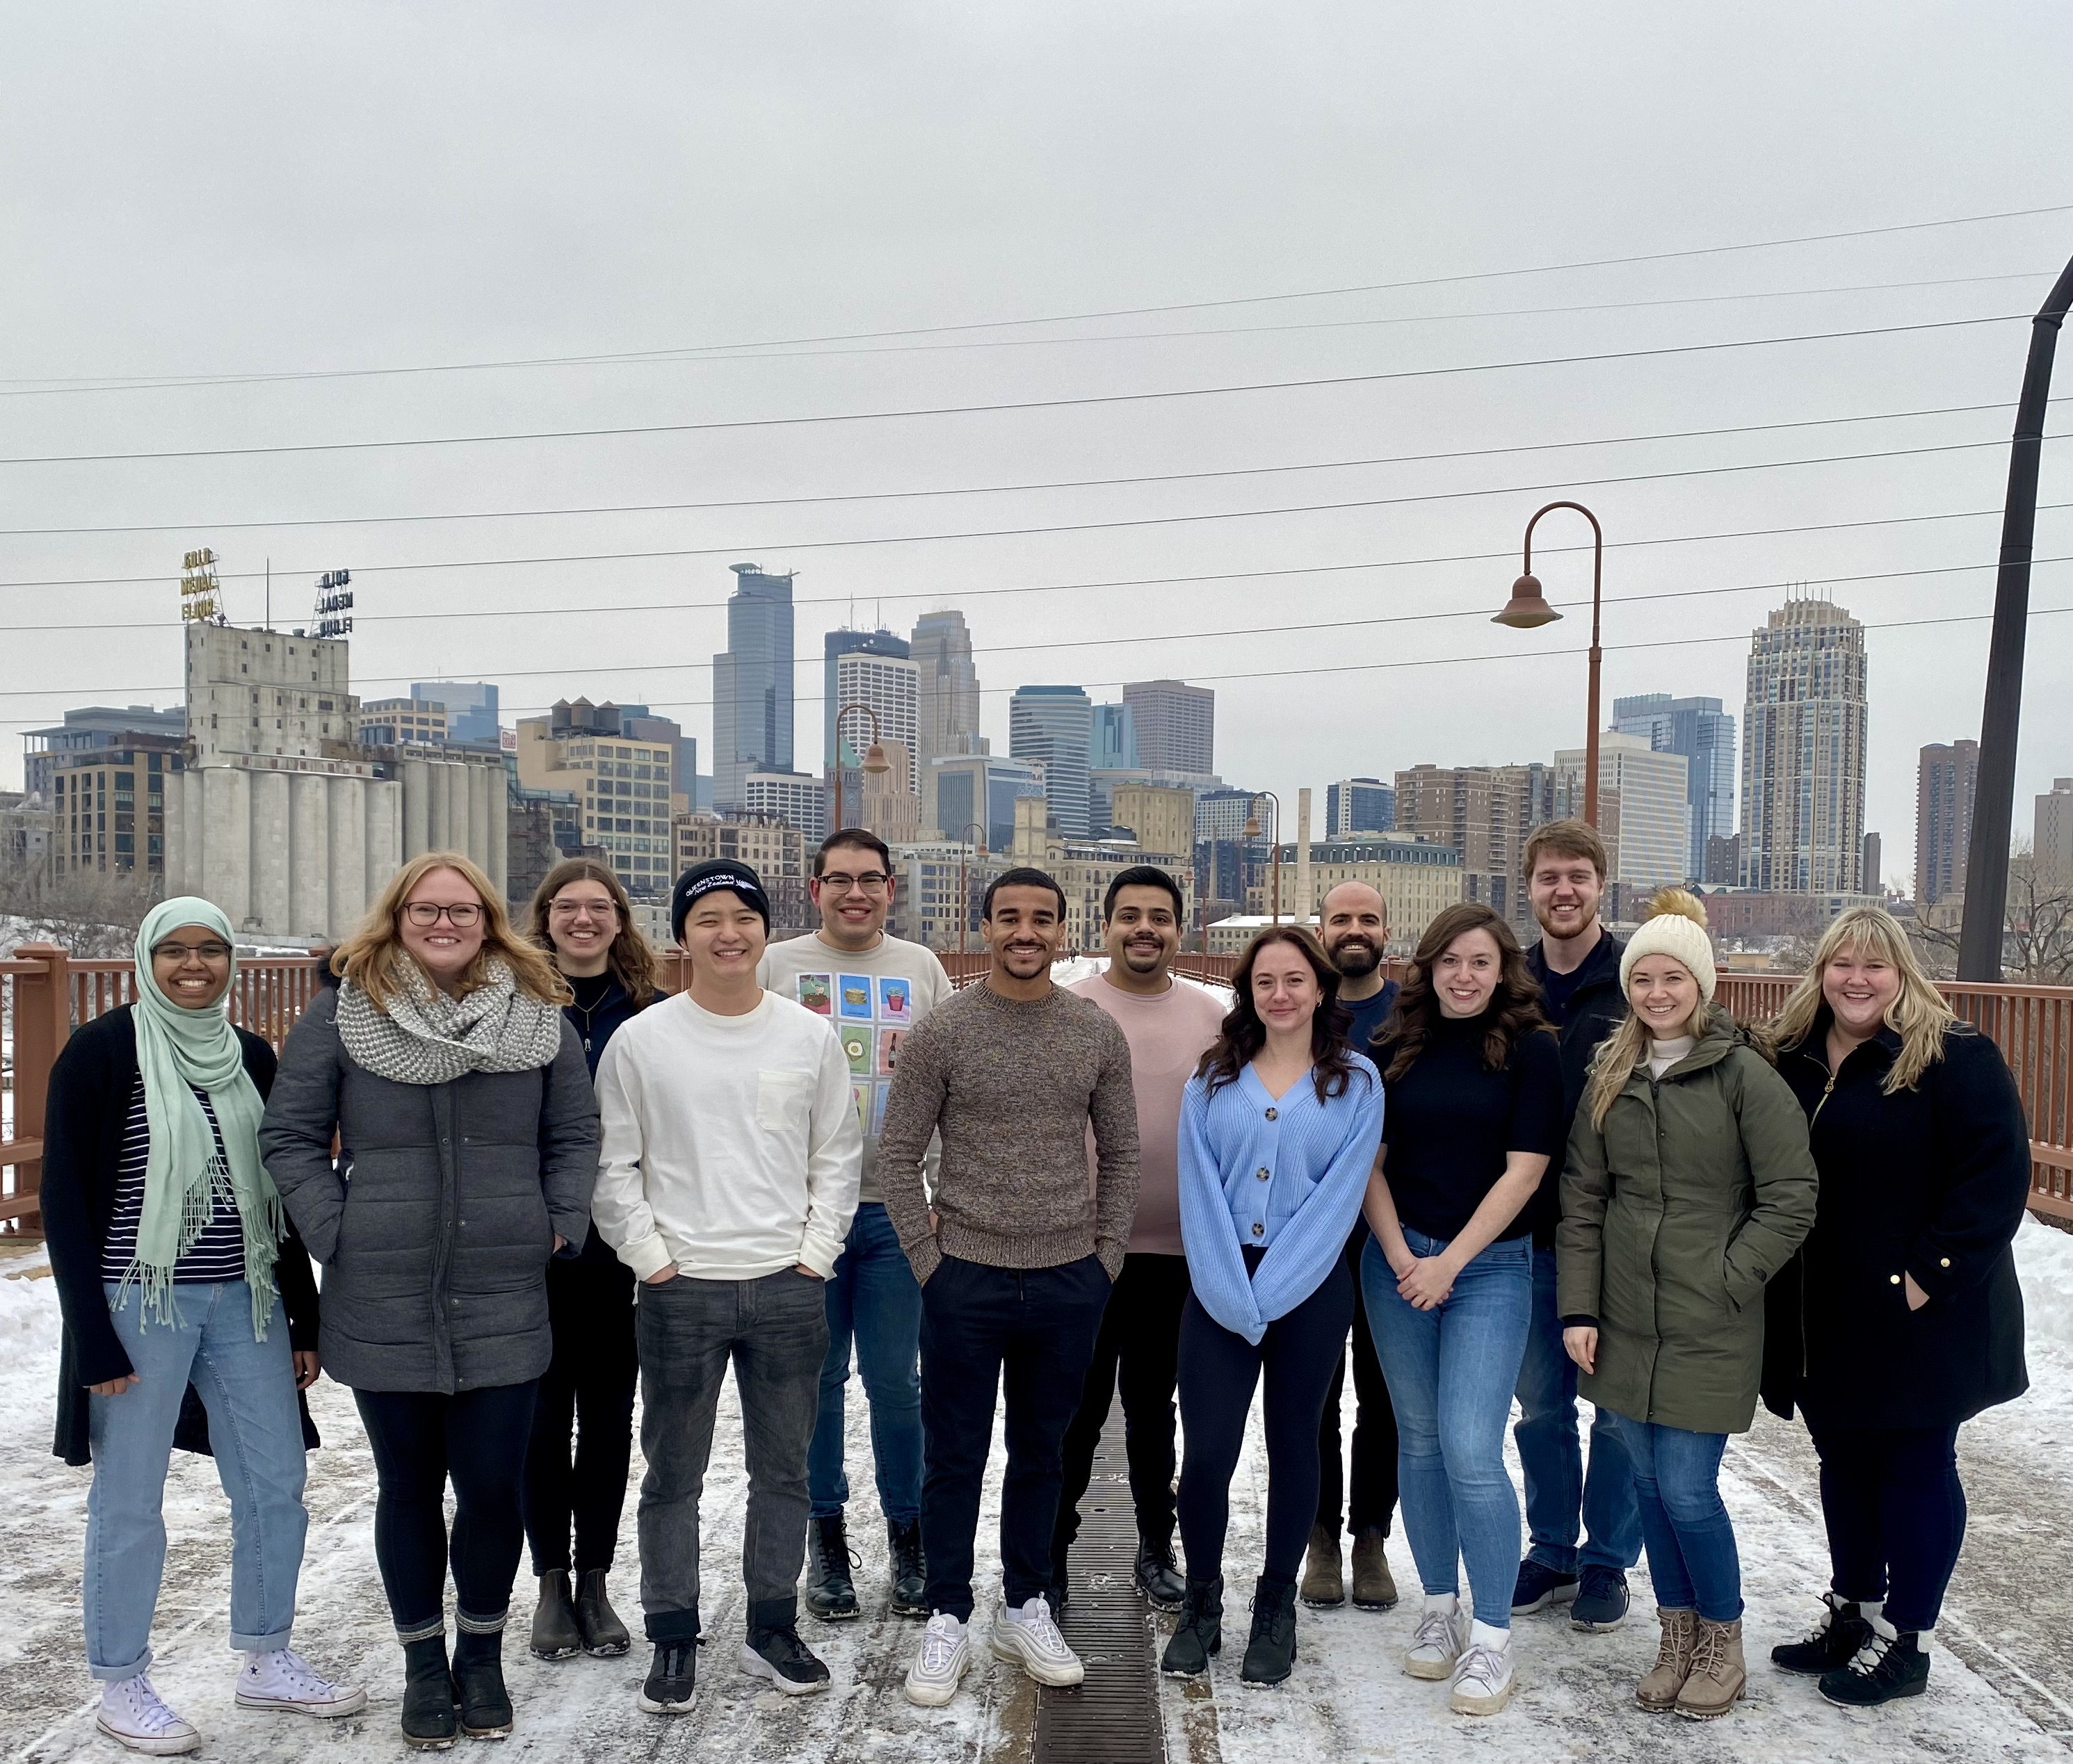 Photo of The Roberts Group outside in a snowy cityscape environment.